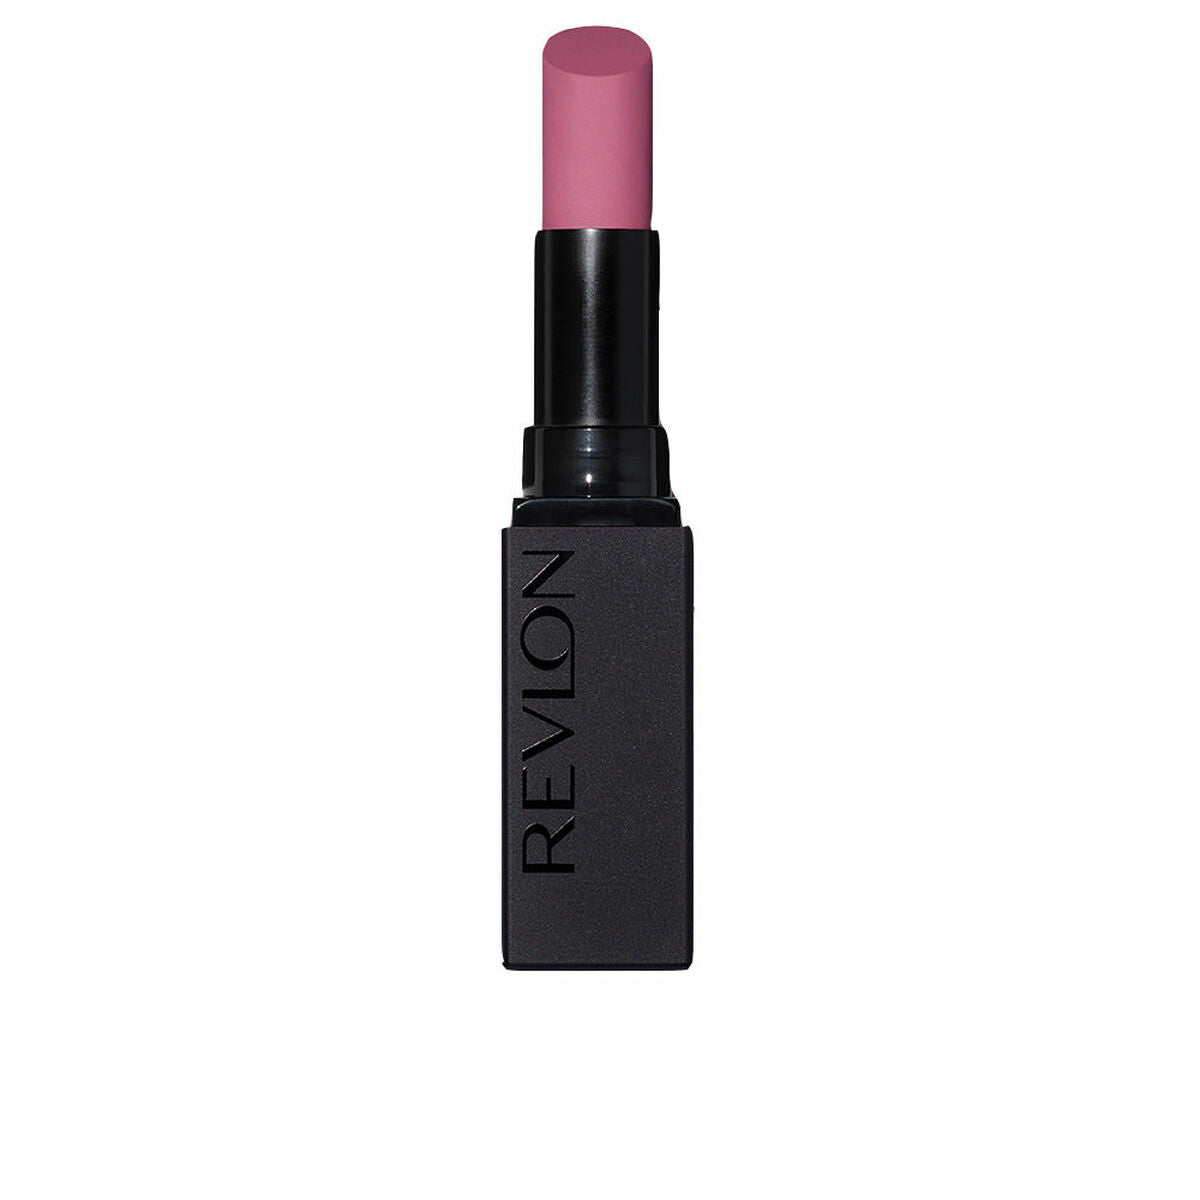 Rossetto Revlon Colorstay Nº 009 In charge 2,55 ml